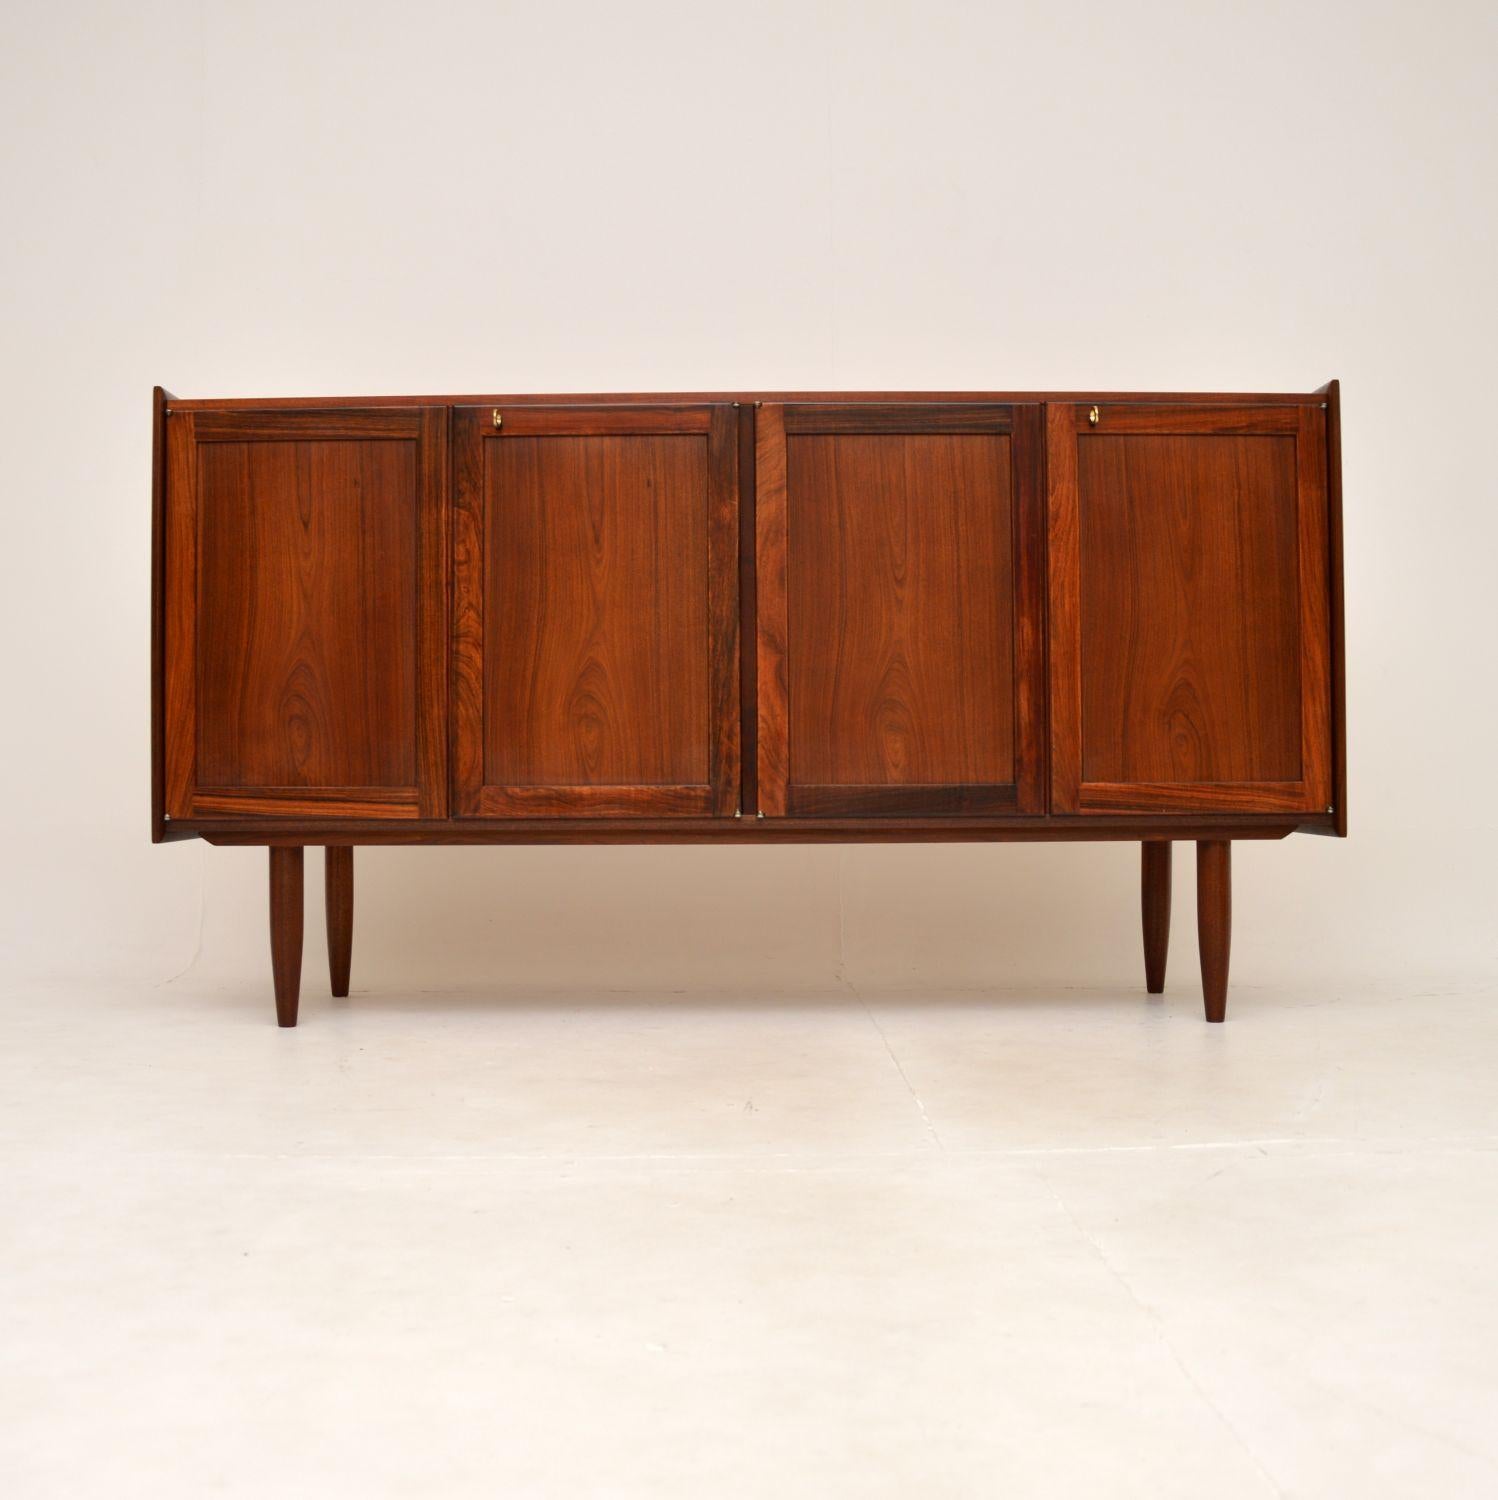 A stylish and extremely well made Danish vintage sideboard. This was made in Denmark, it dates from around the 1960’s.

It is of superb quality and is a very useful size, with lots of storage space. The colour tones and grain patterns are gorgeous,